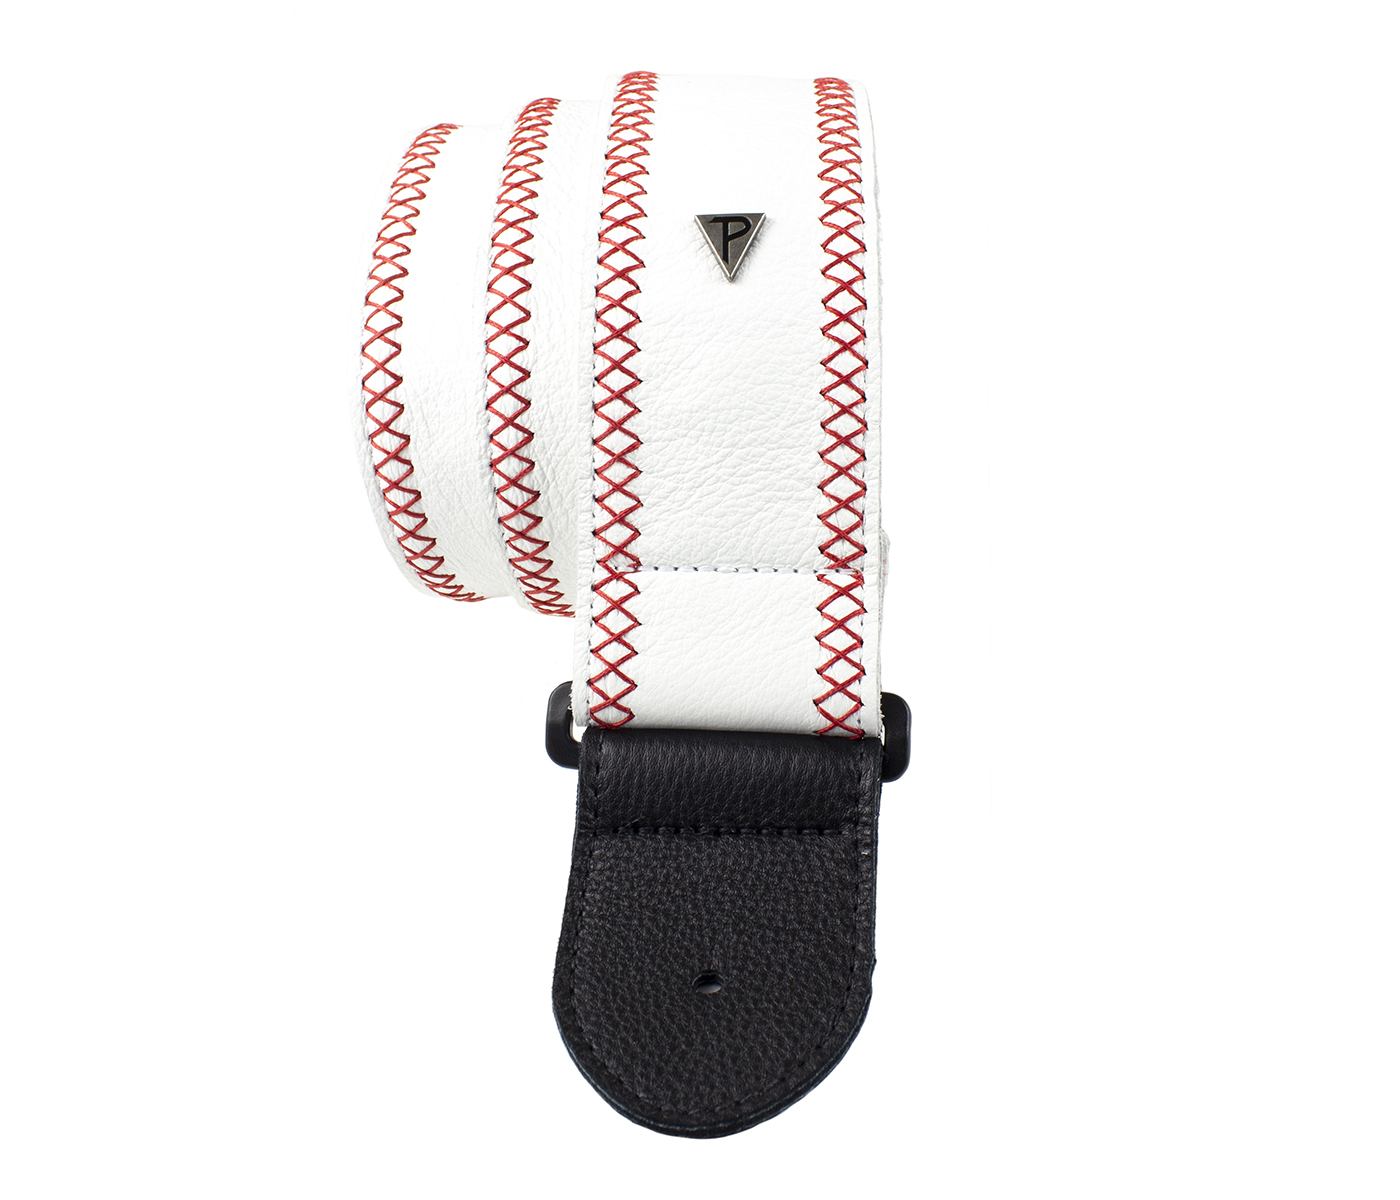 Soft White Glove Leather With Red Fancy Stitch Guitar Strap 